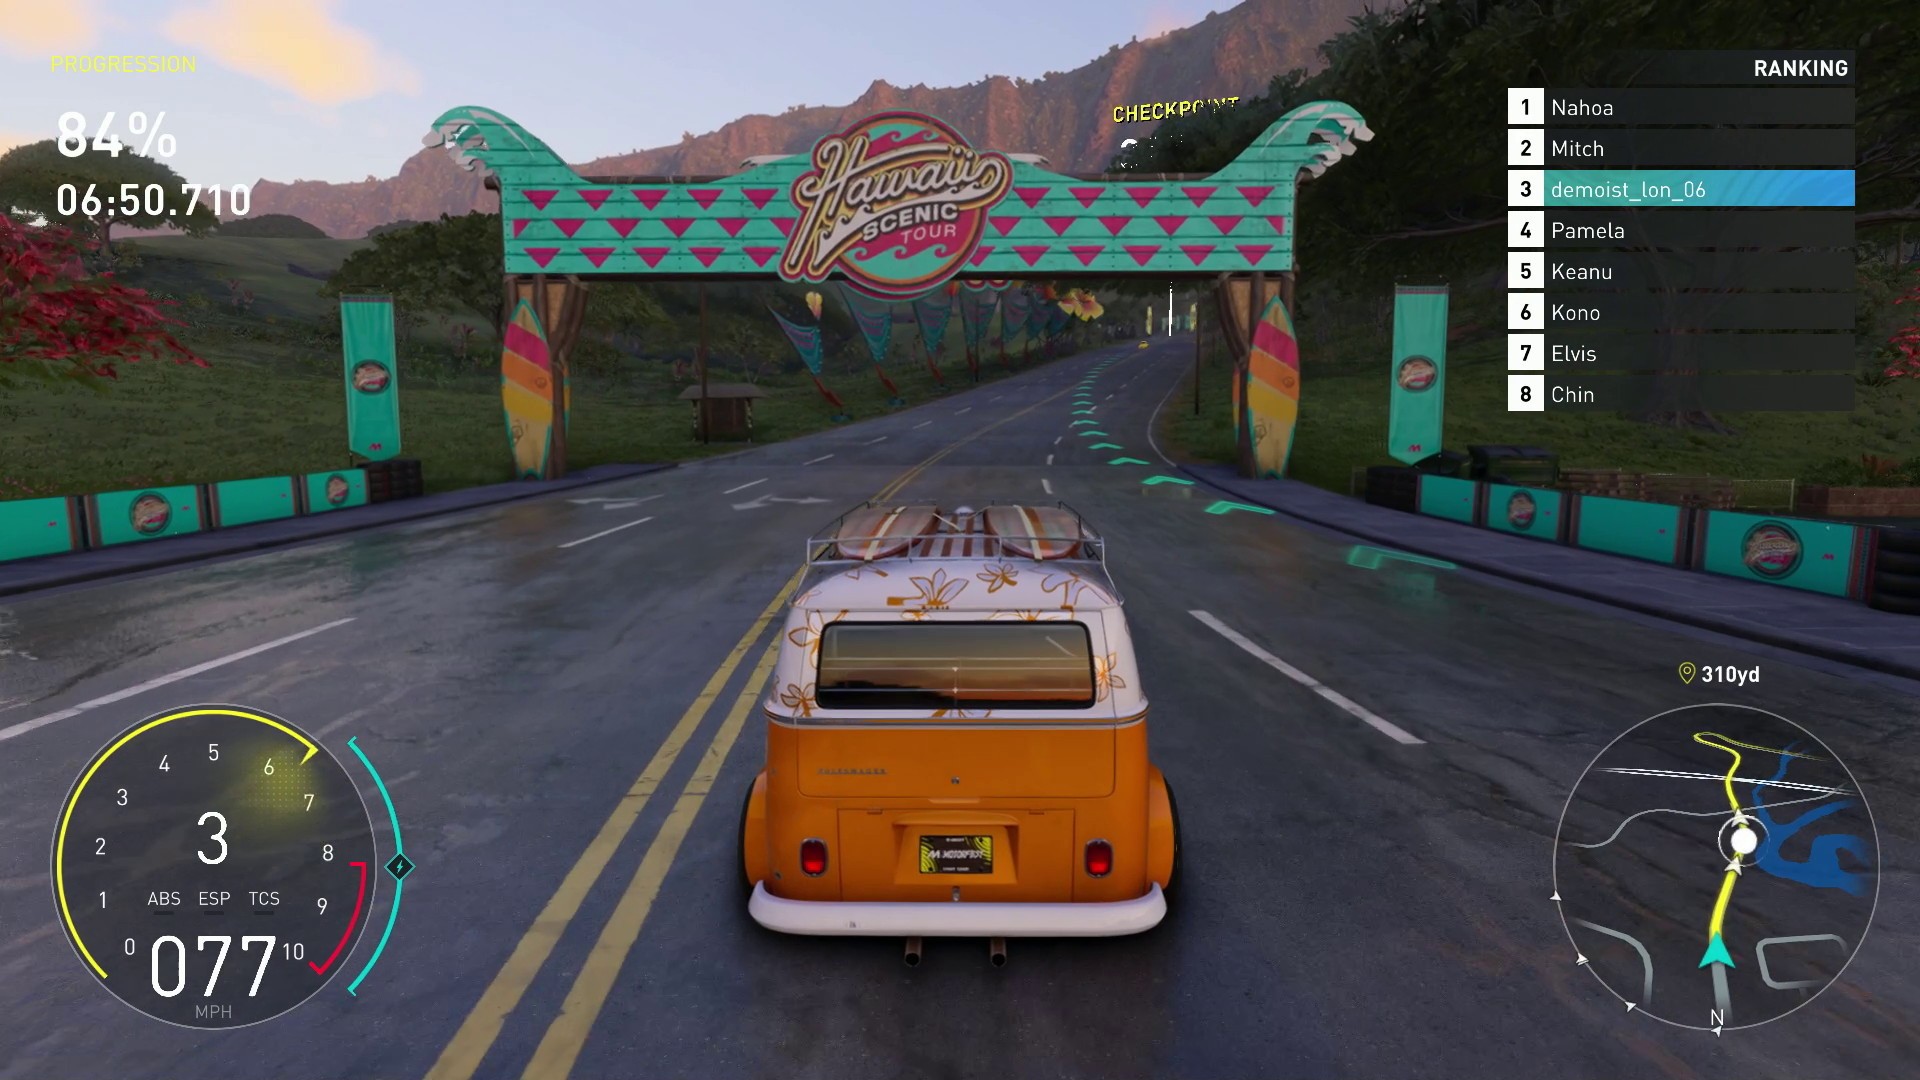 The Crew Motorfest Video Is All About the Cars, Customization, & More